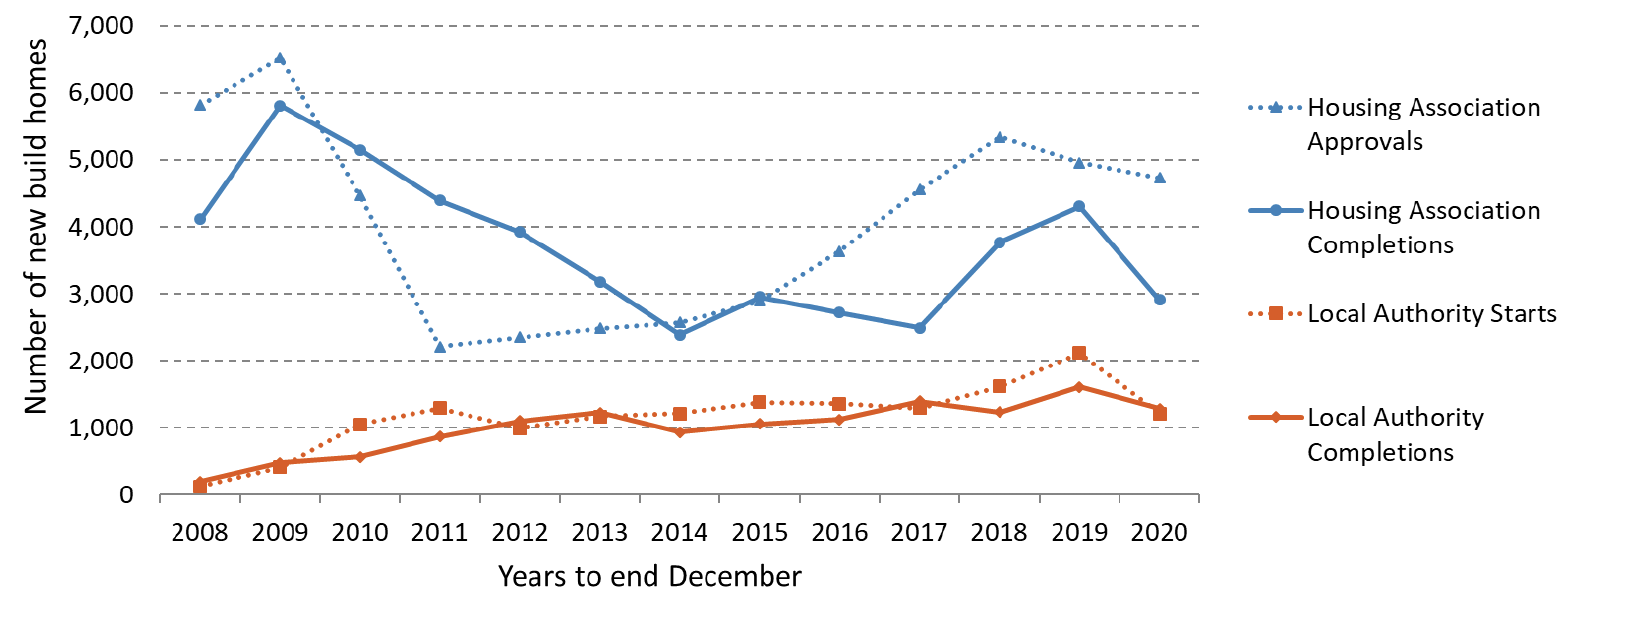 Annual Housing Association and Local Authority new build starts and completions in the years to end September from 2008 to 2020